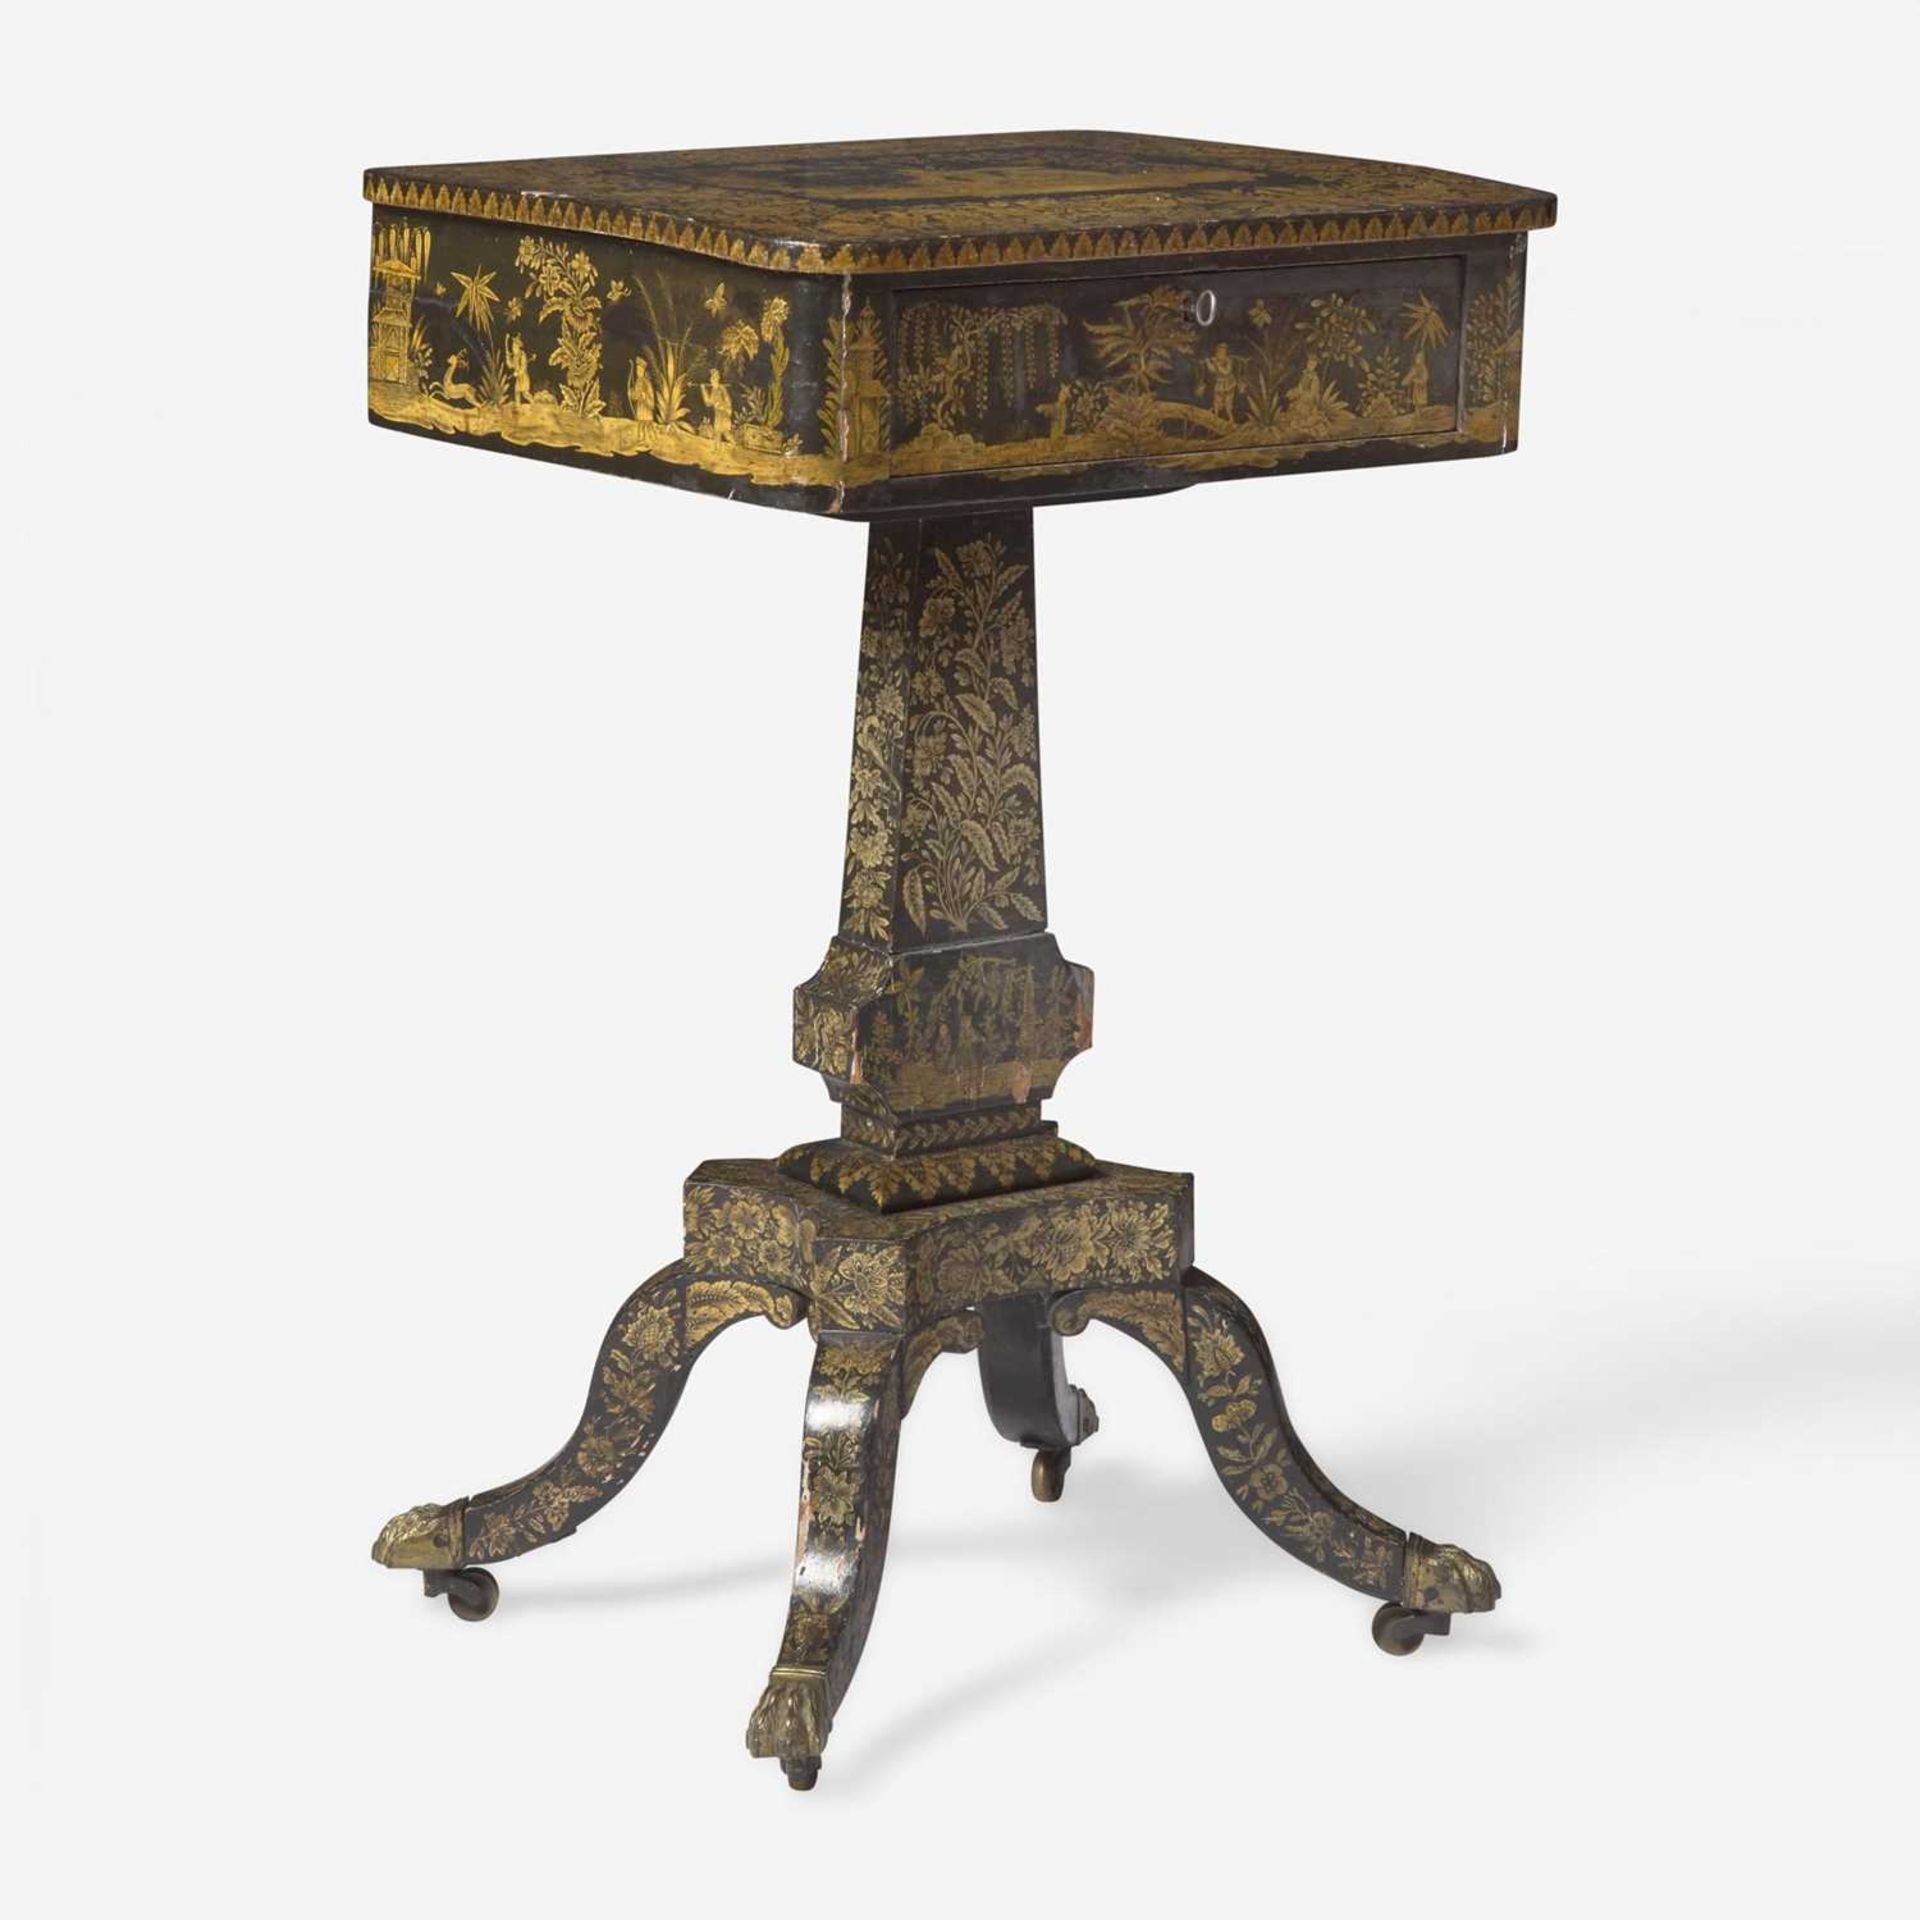 A Regency Chinoiserie penwork sewing stand early 19th century - Image 2 of 3